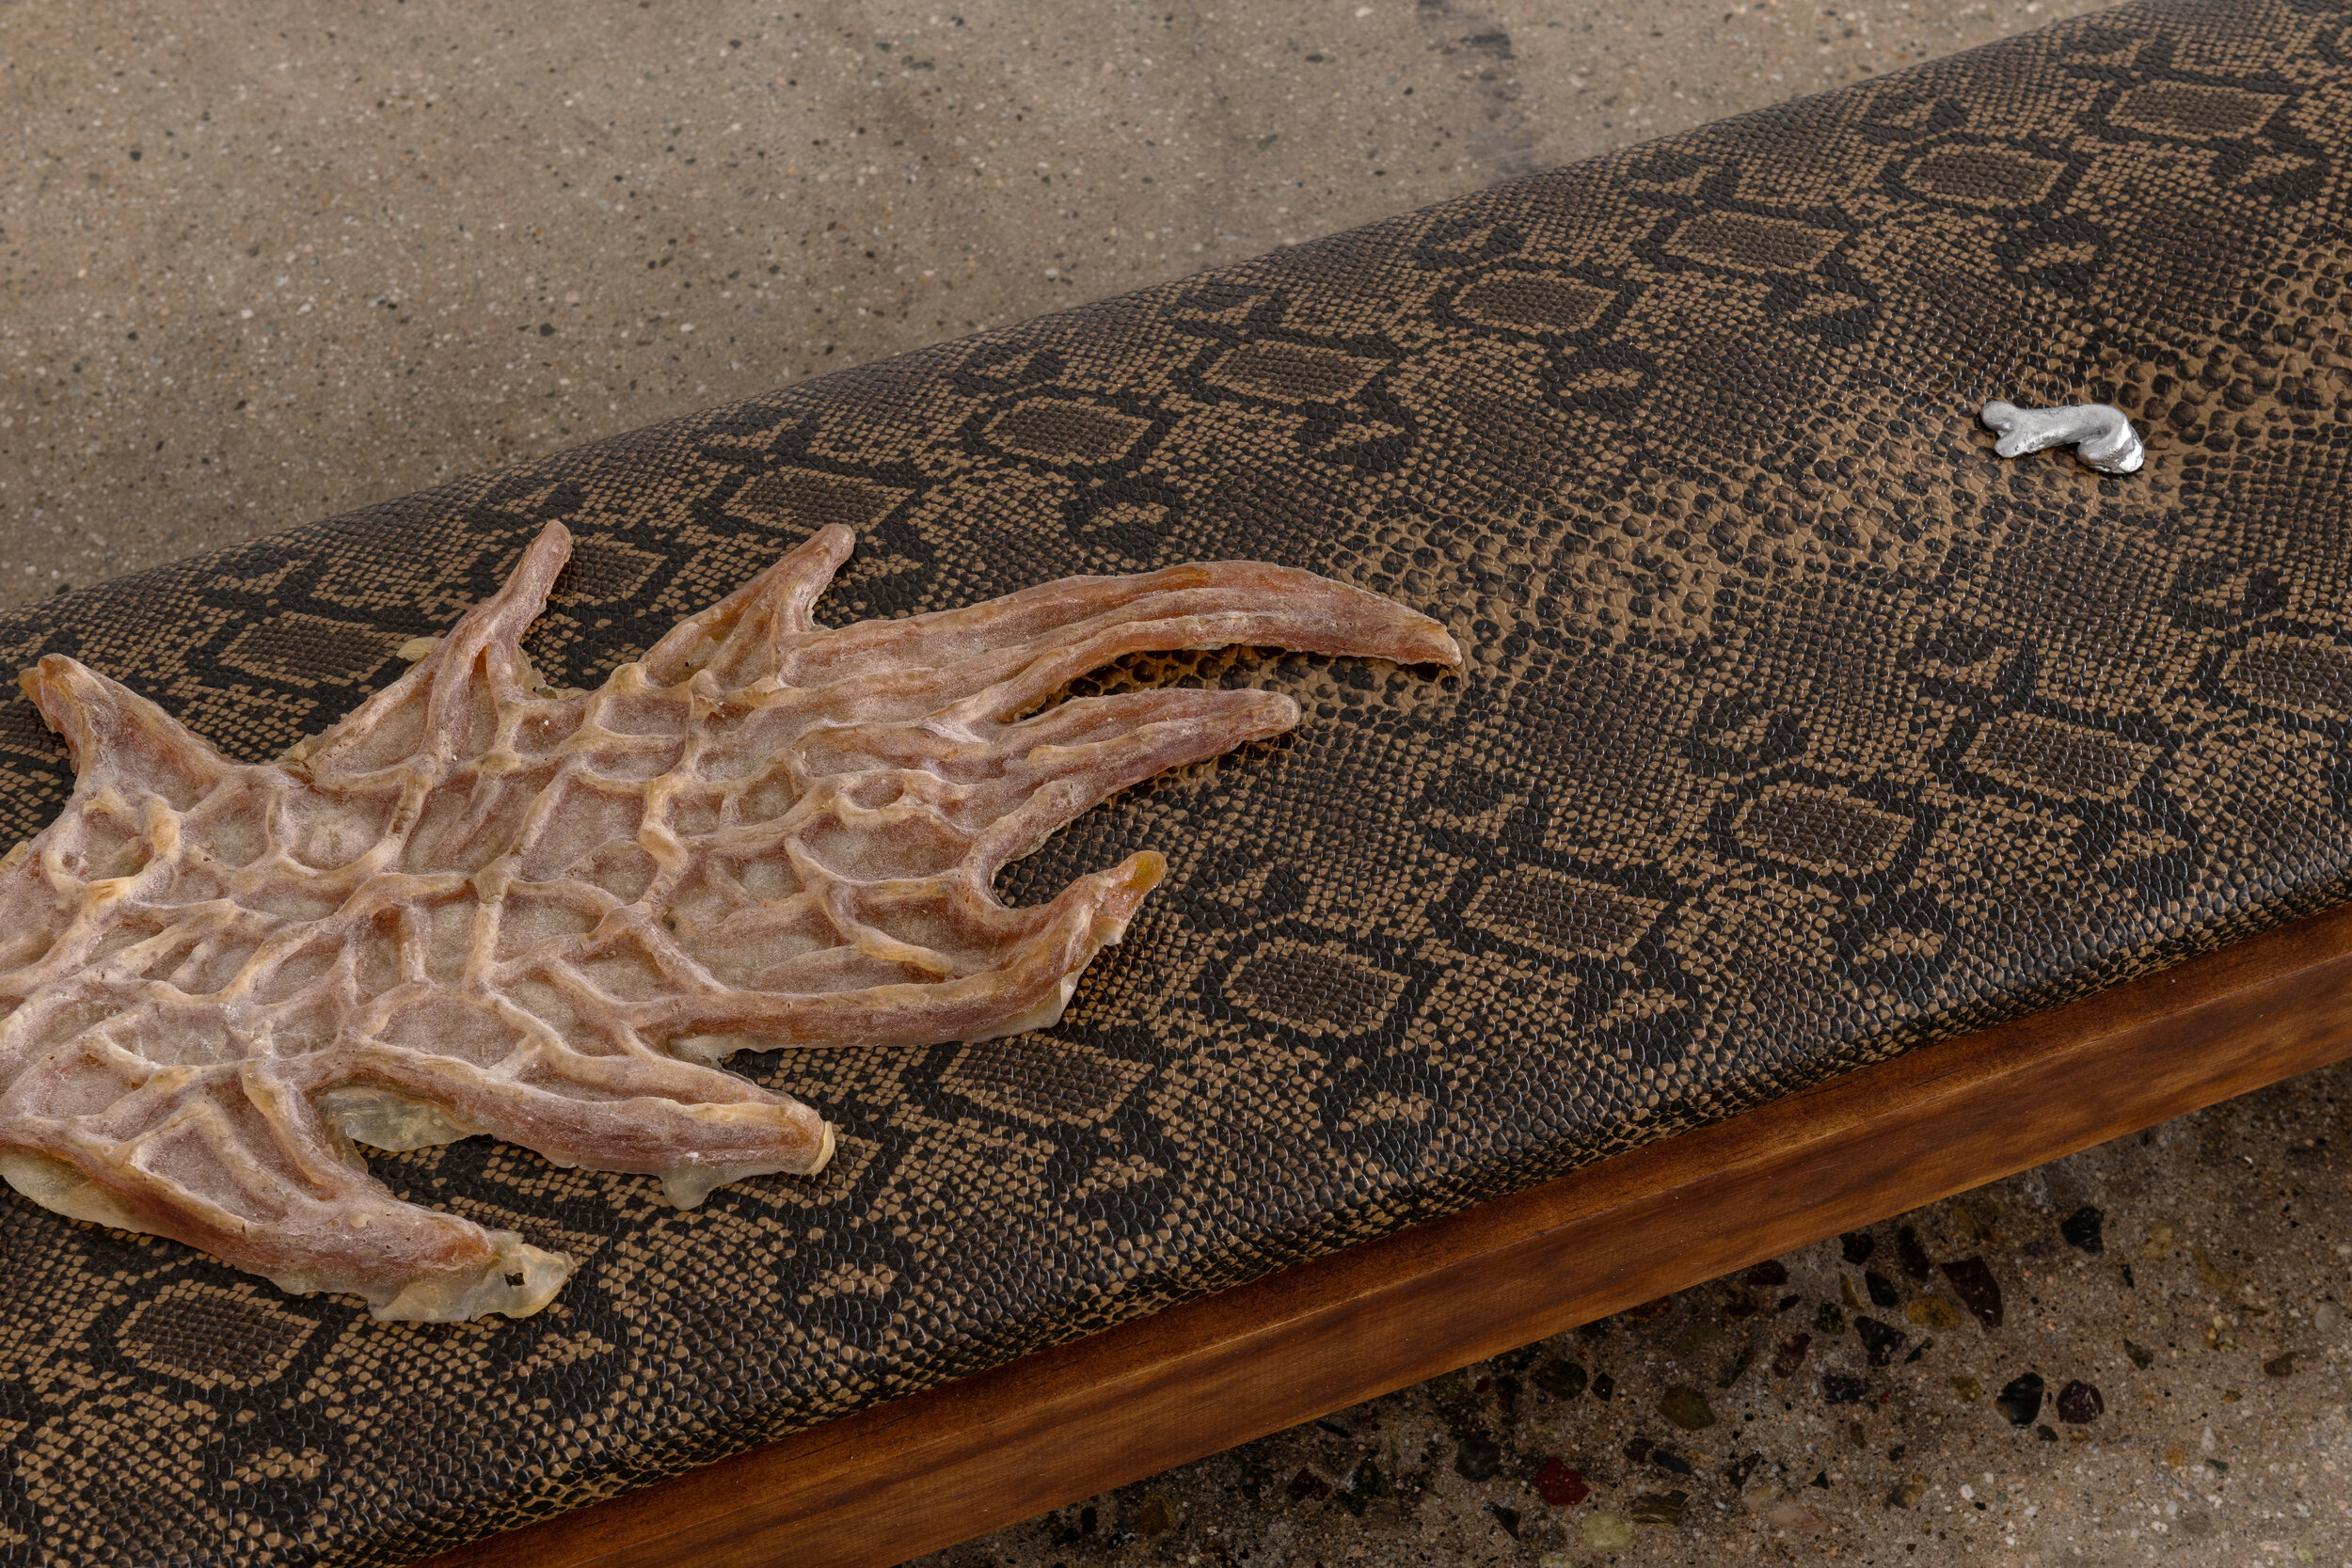  Detail view of   Sessa Englund   Upholstered skeleton structure with skin, heart and snakeskin (structure series)  2021 Cherry wood, upholstery fabric, leather, carving, soot, cast latex, cast tin 